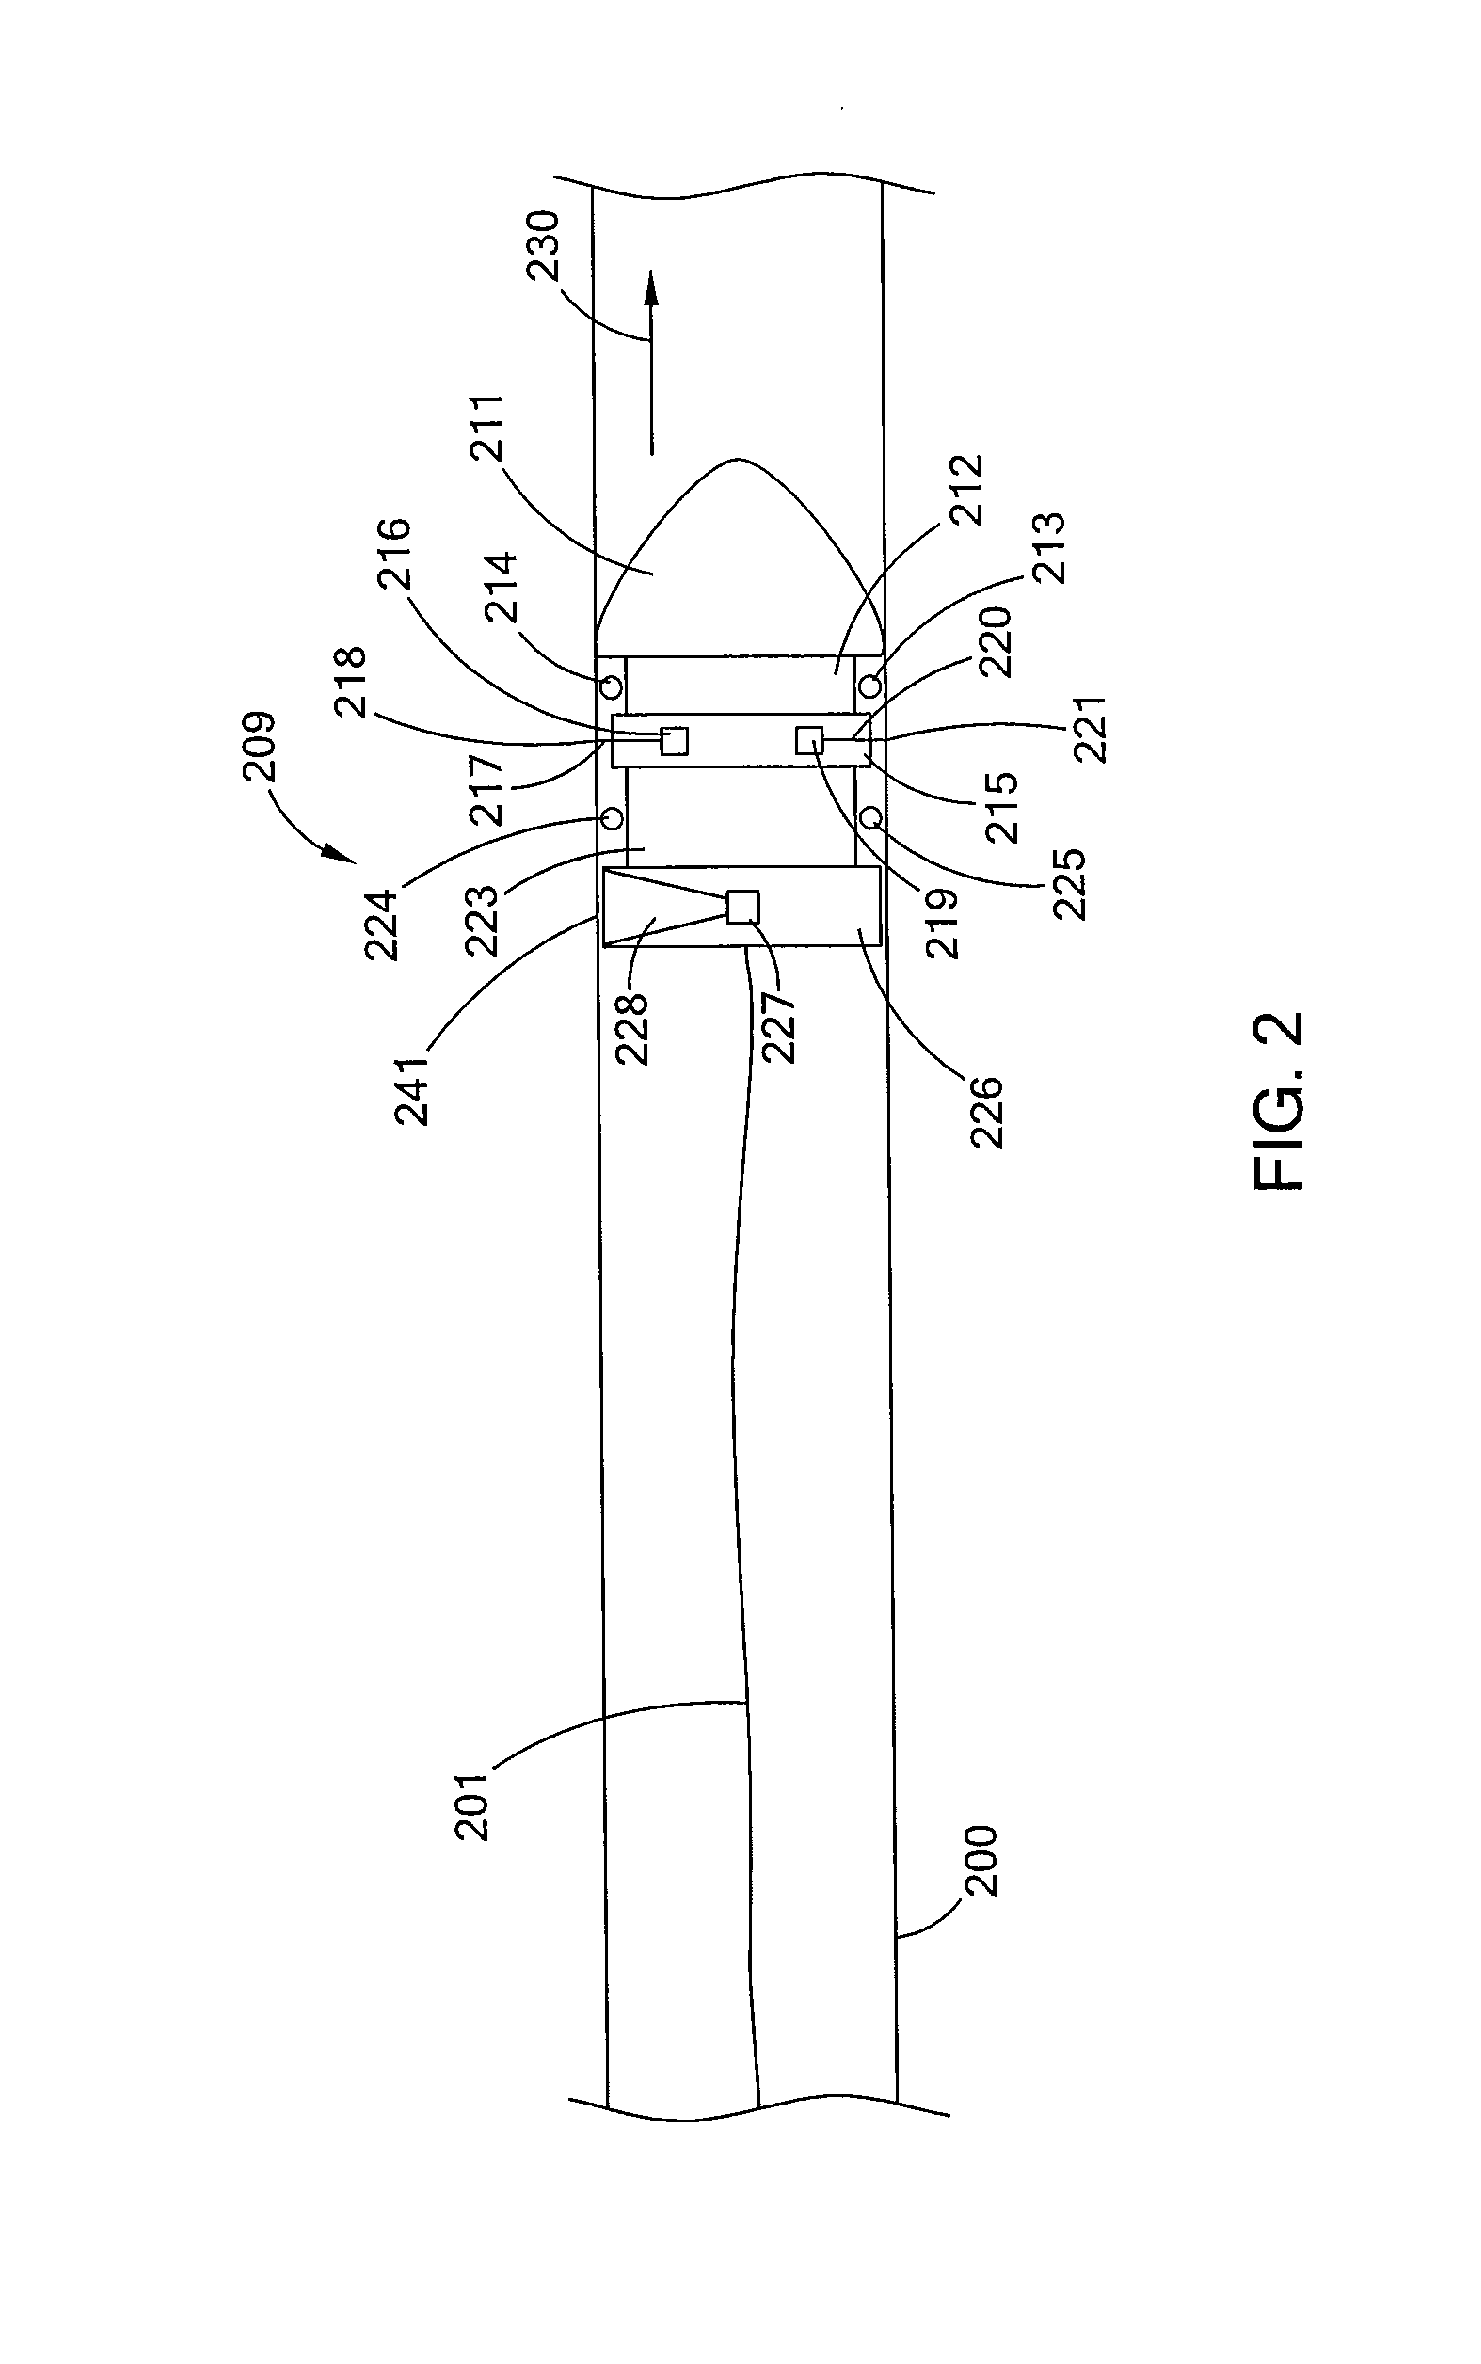 High power laser pipeline tool and methods of use